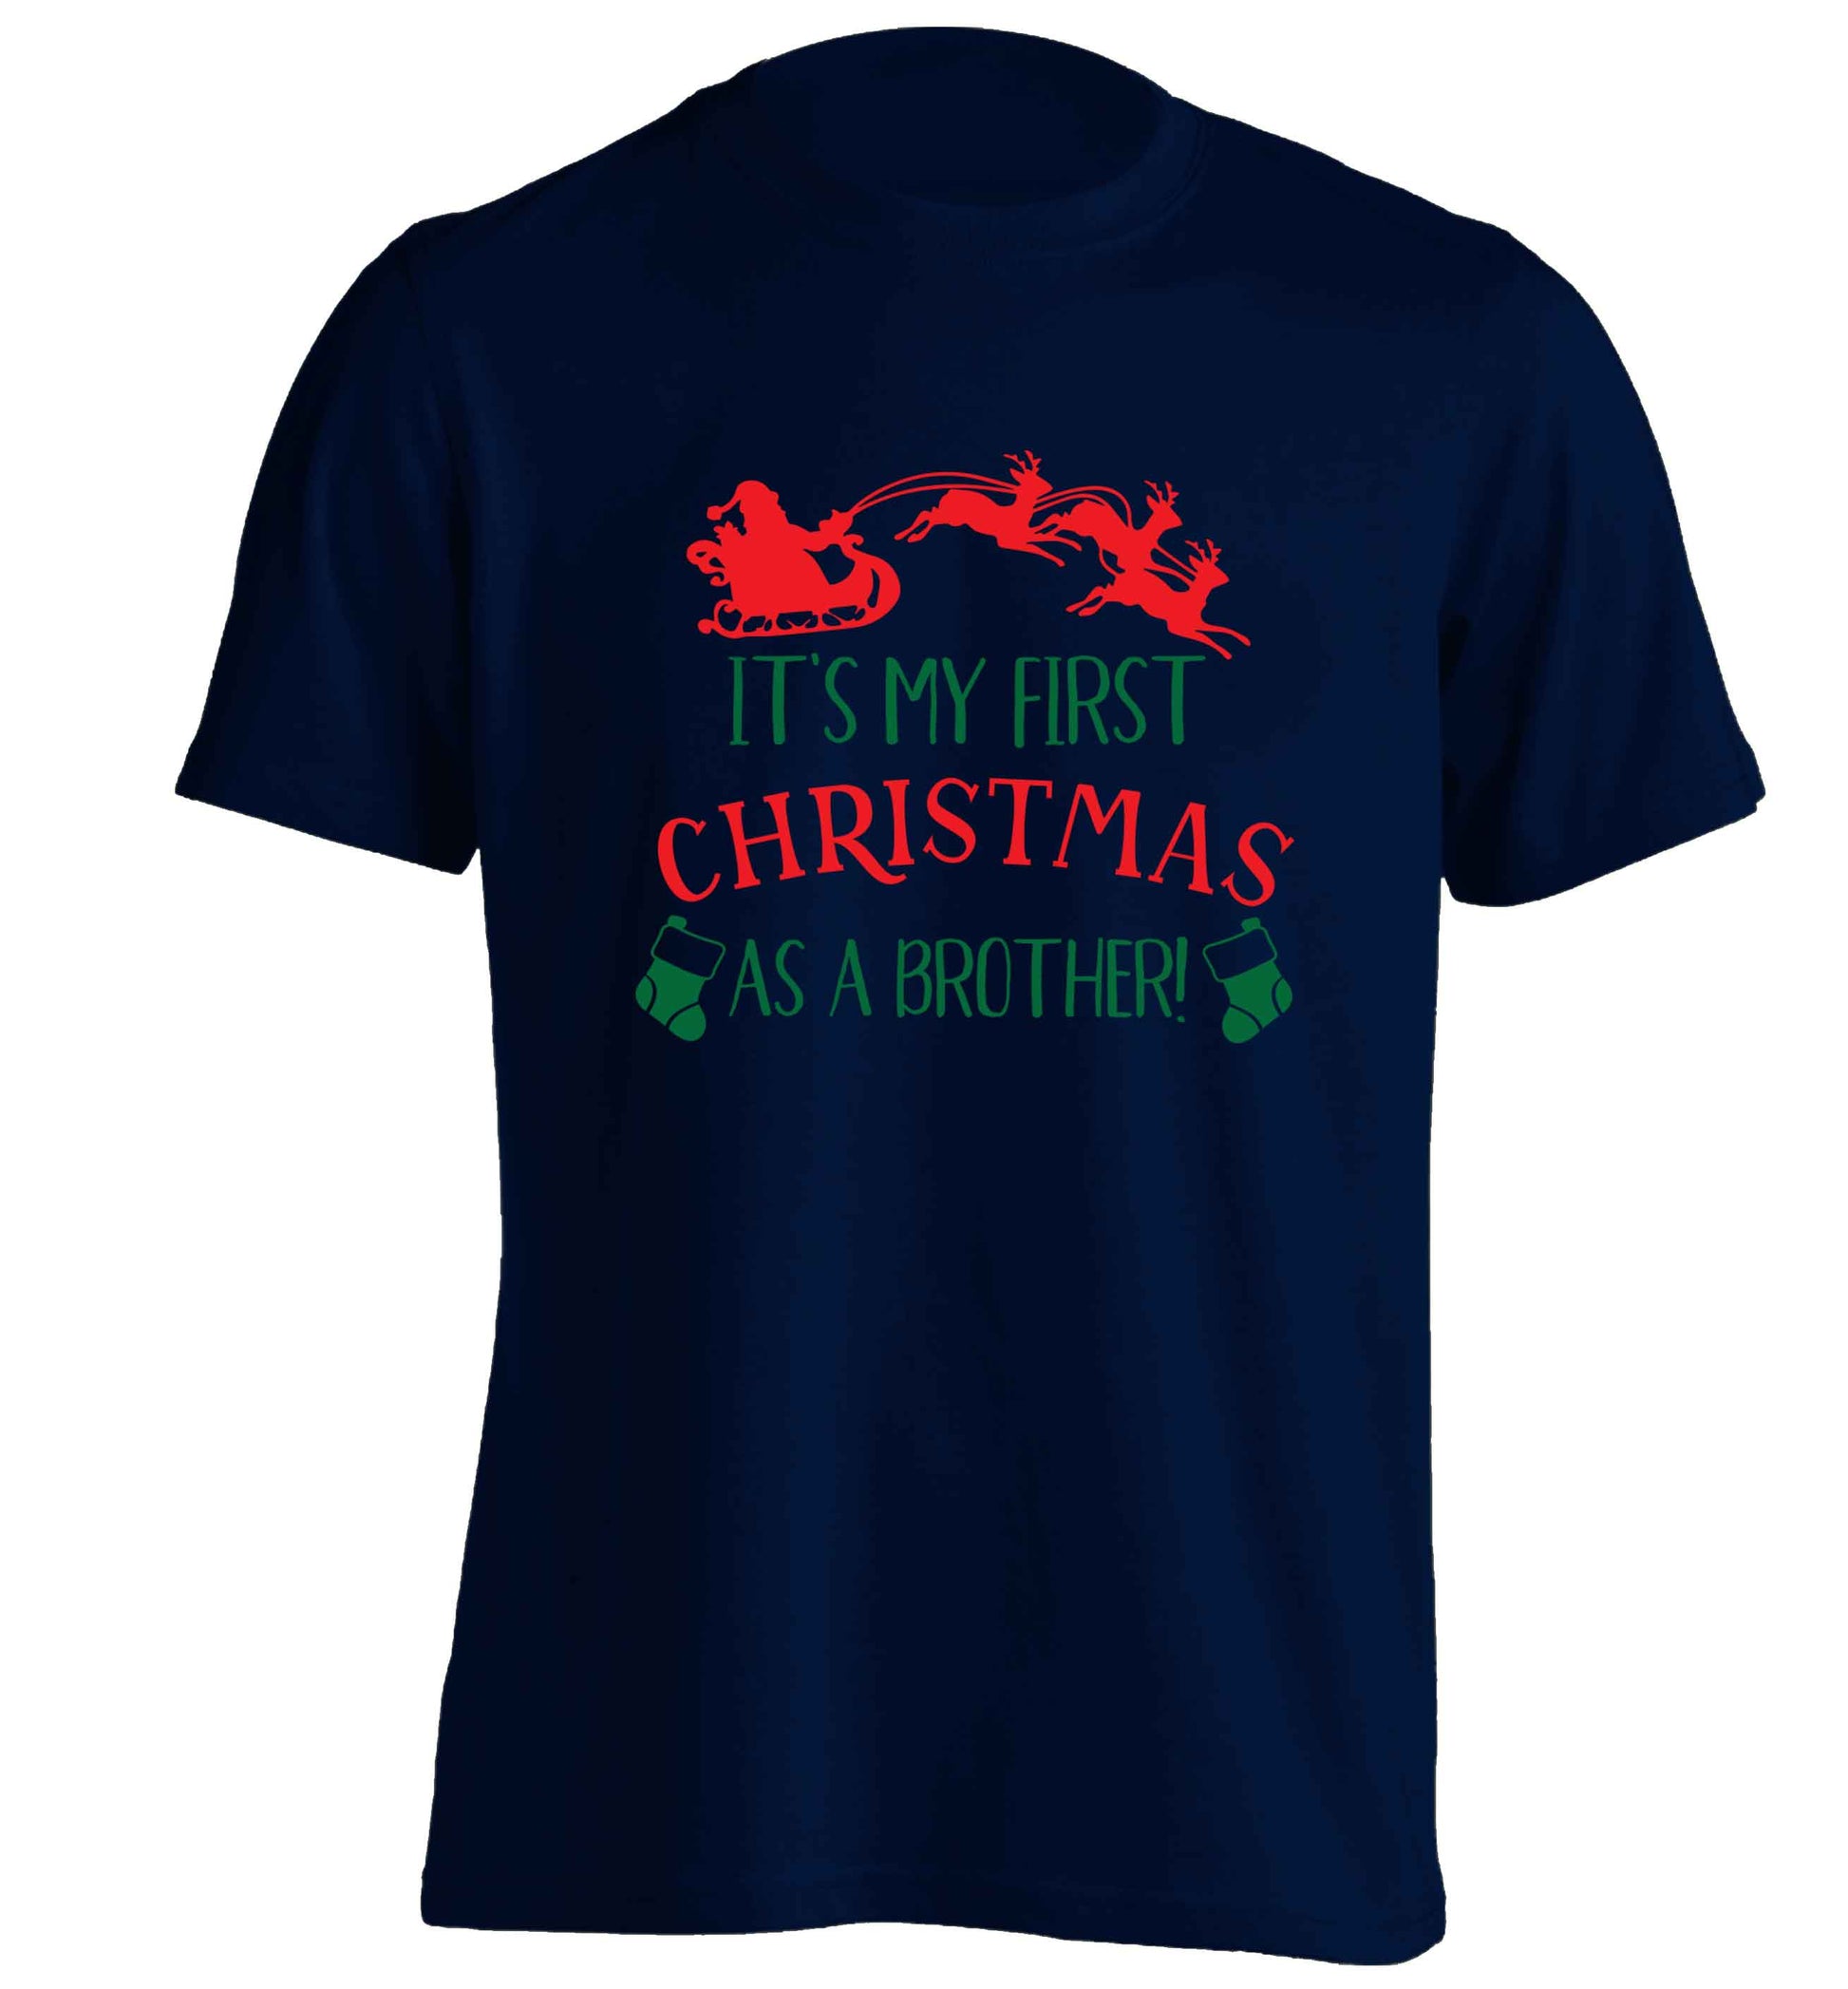 It's my first Christmas as a brother! adults unisex navy Tshirt 2XL